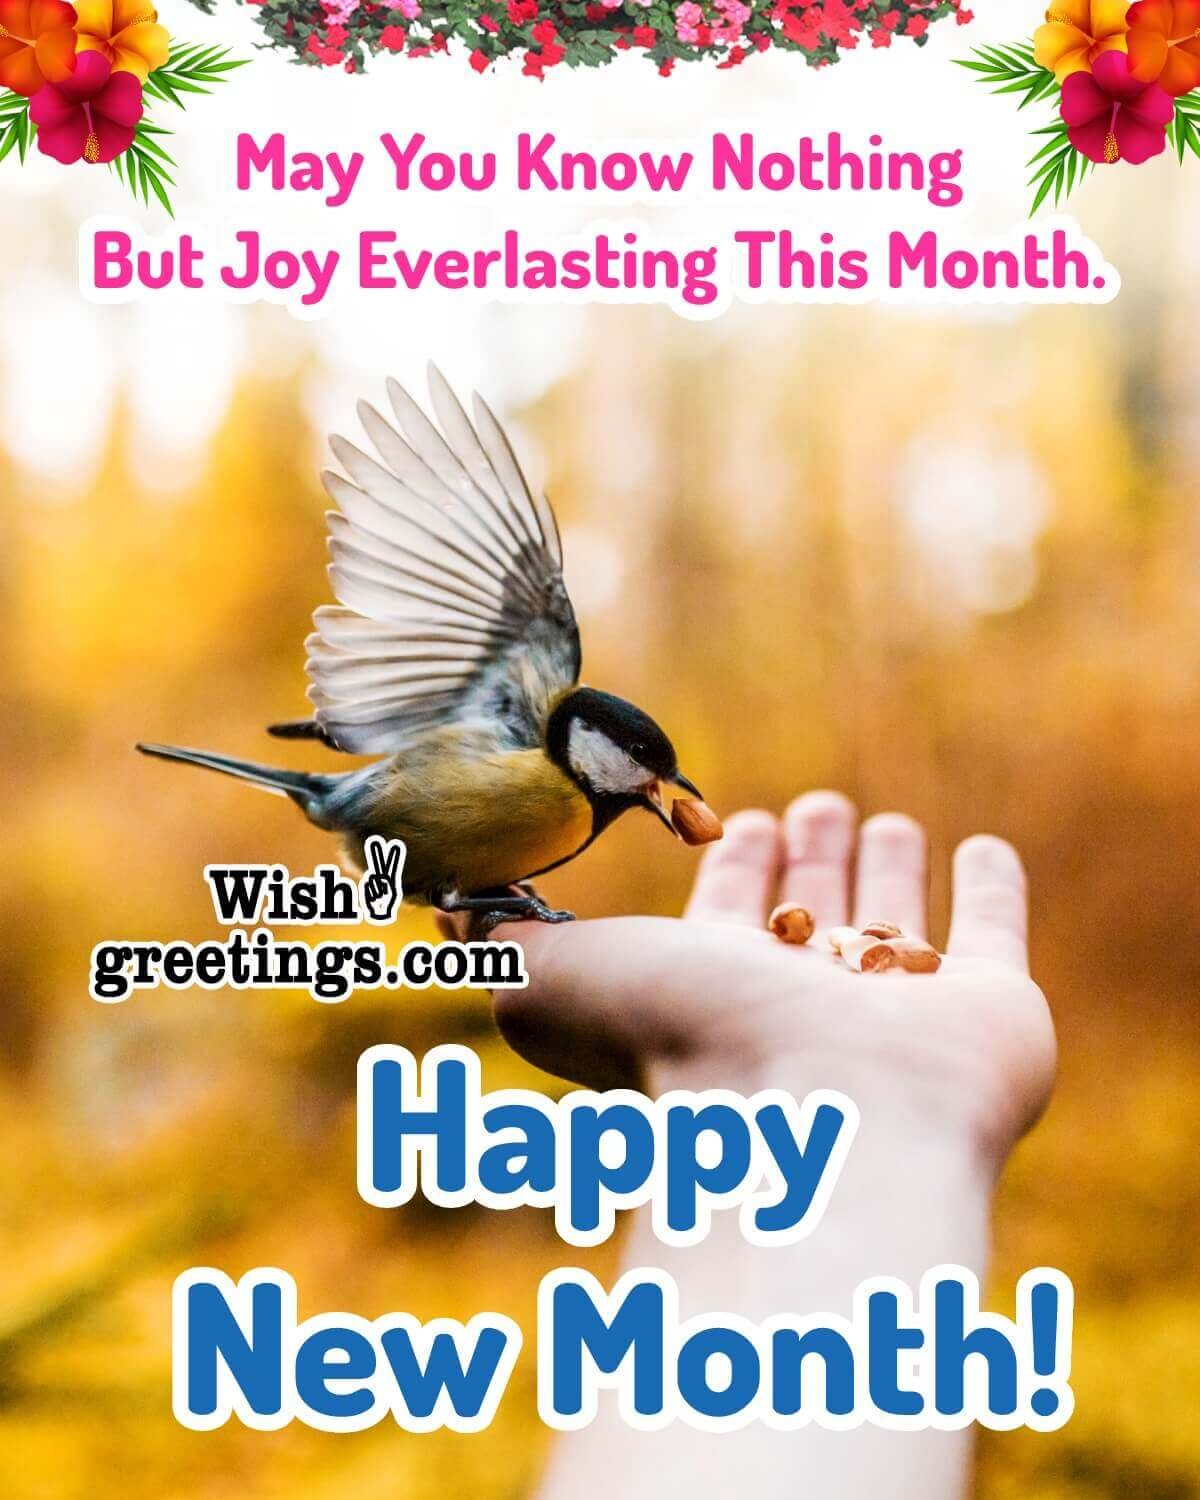 Happy New Month To You